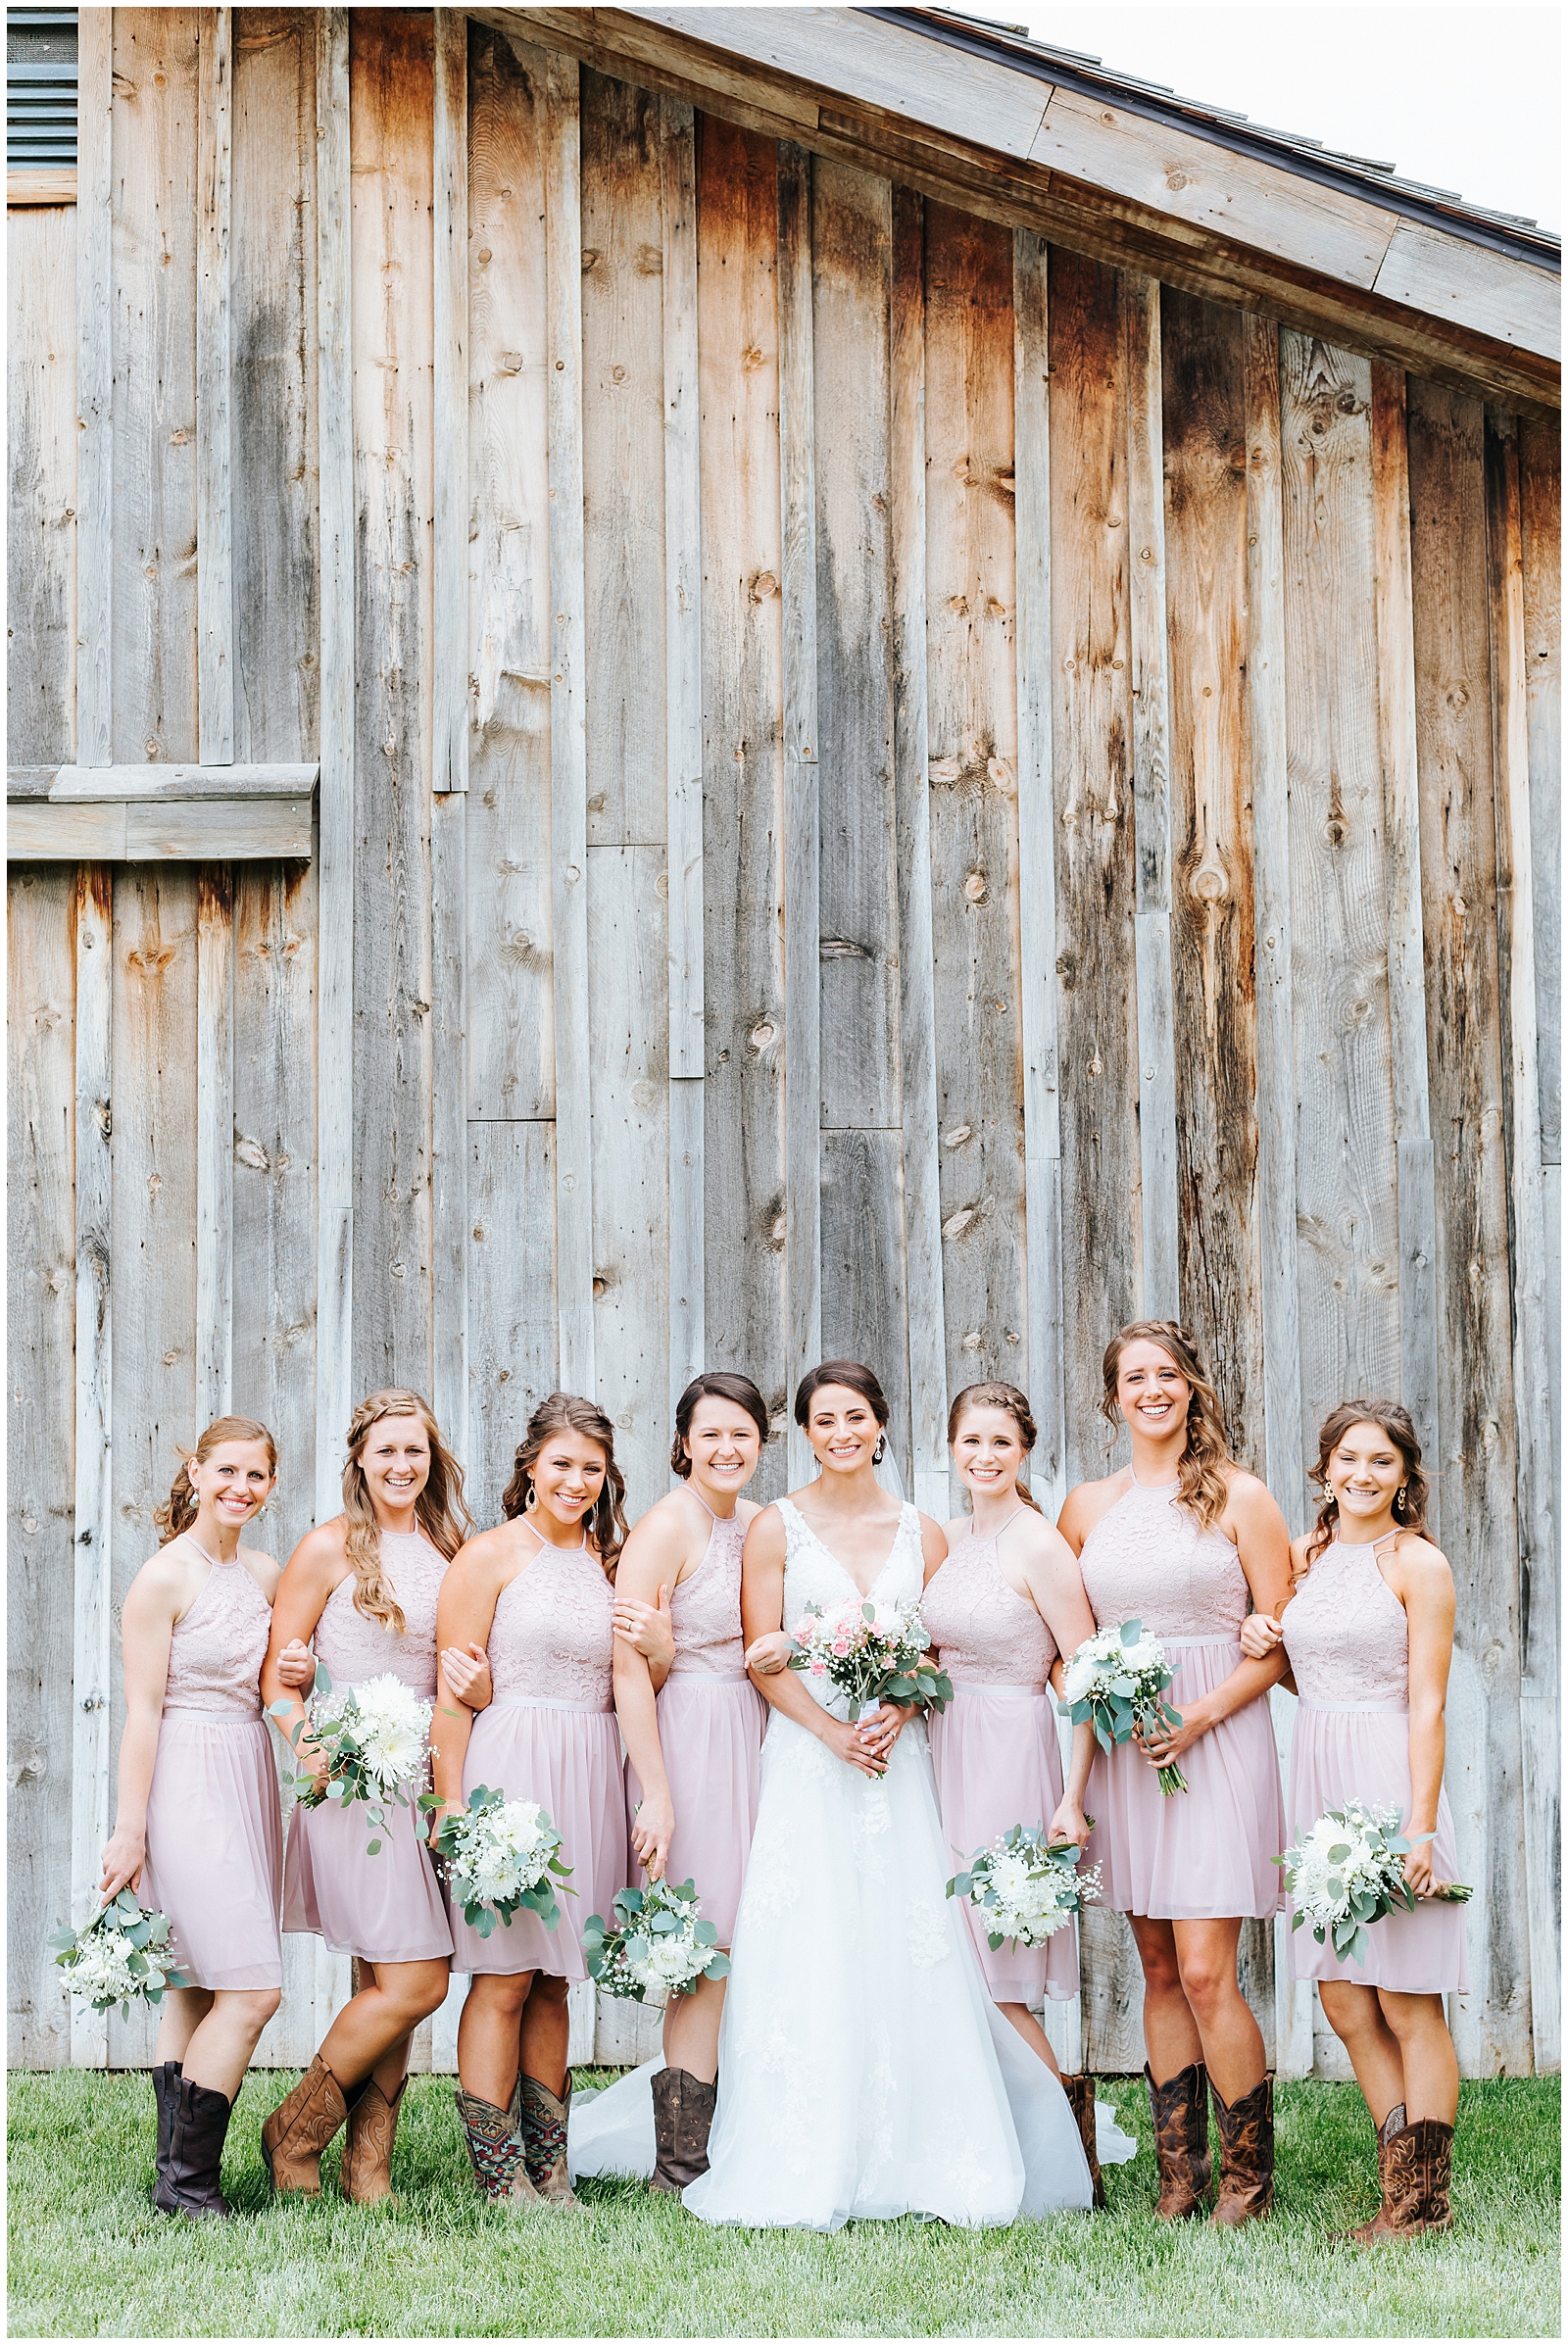 Bridesmaids in blush knee length dresses with cowboy boots